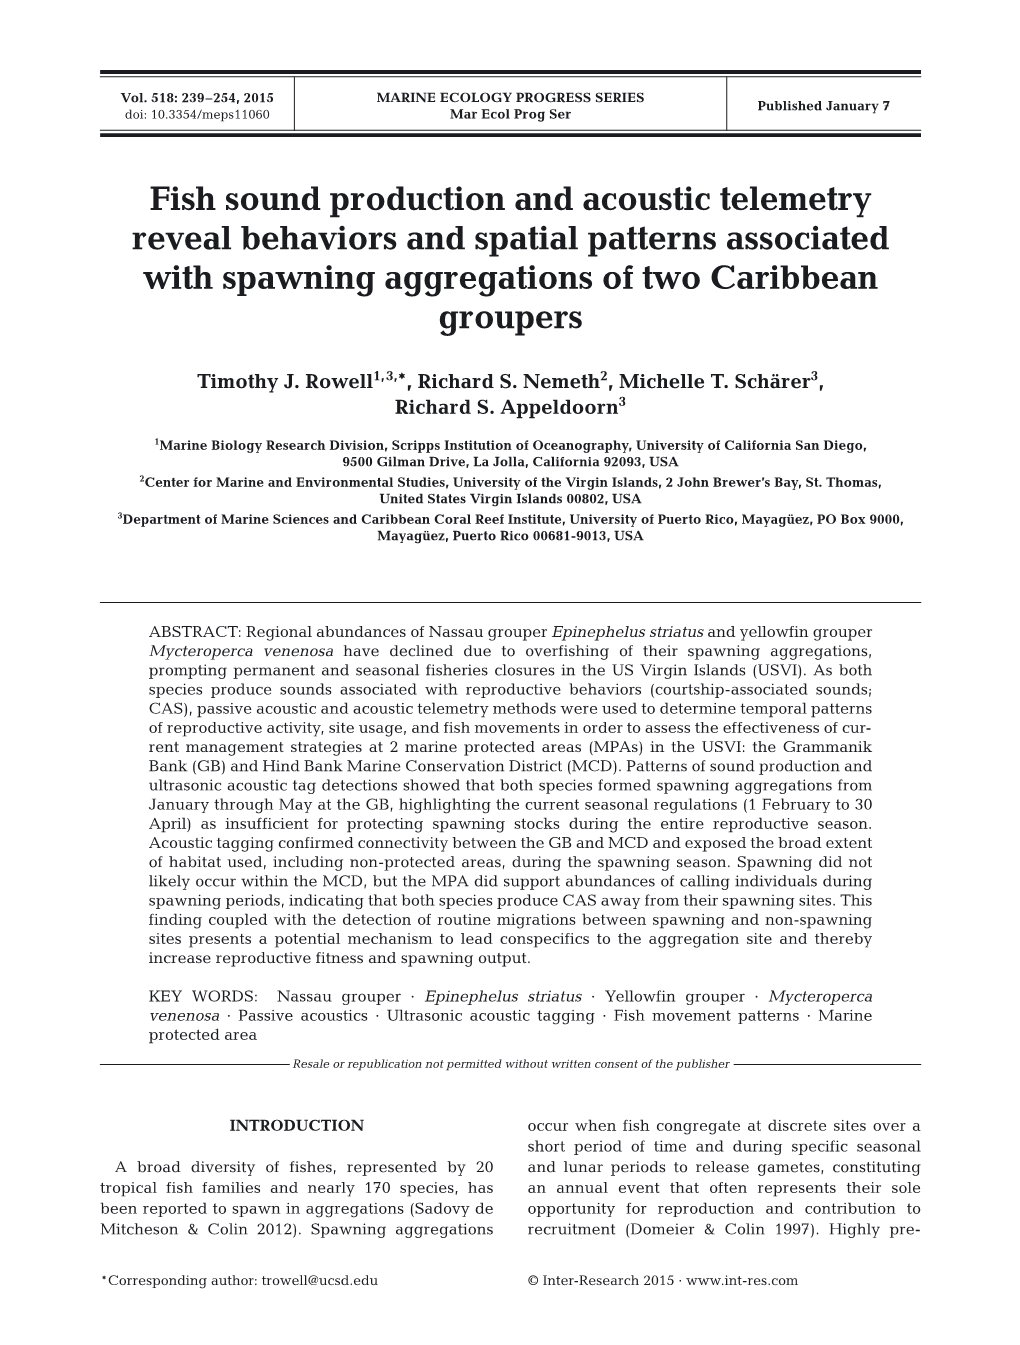 Fish Sound Production and Acoustic Telemetry Reveal Behaviors and Spatial Patterns Associated with Spawning Aggregations of Two Caribbean Groupers